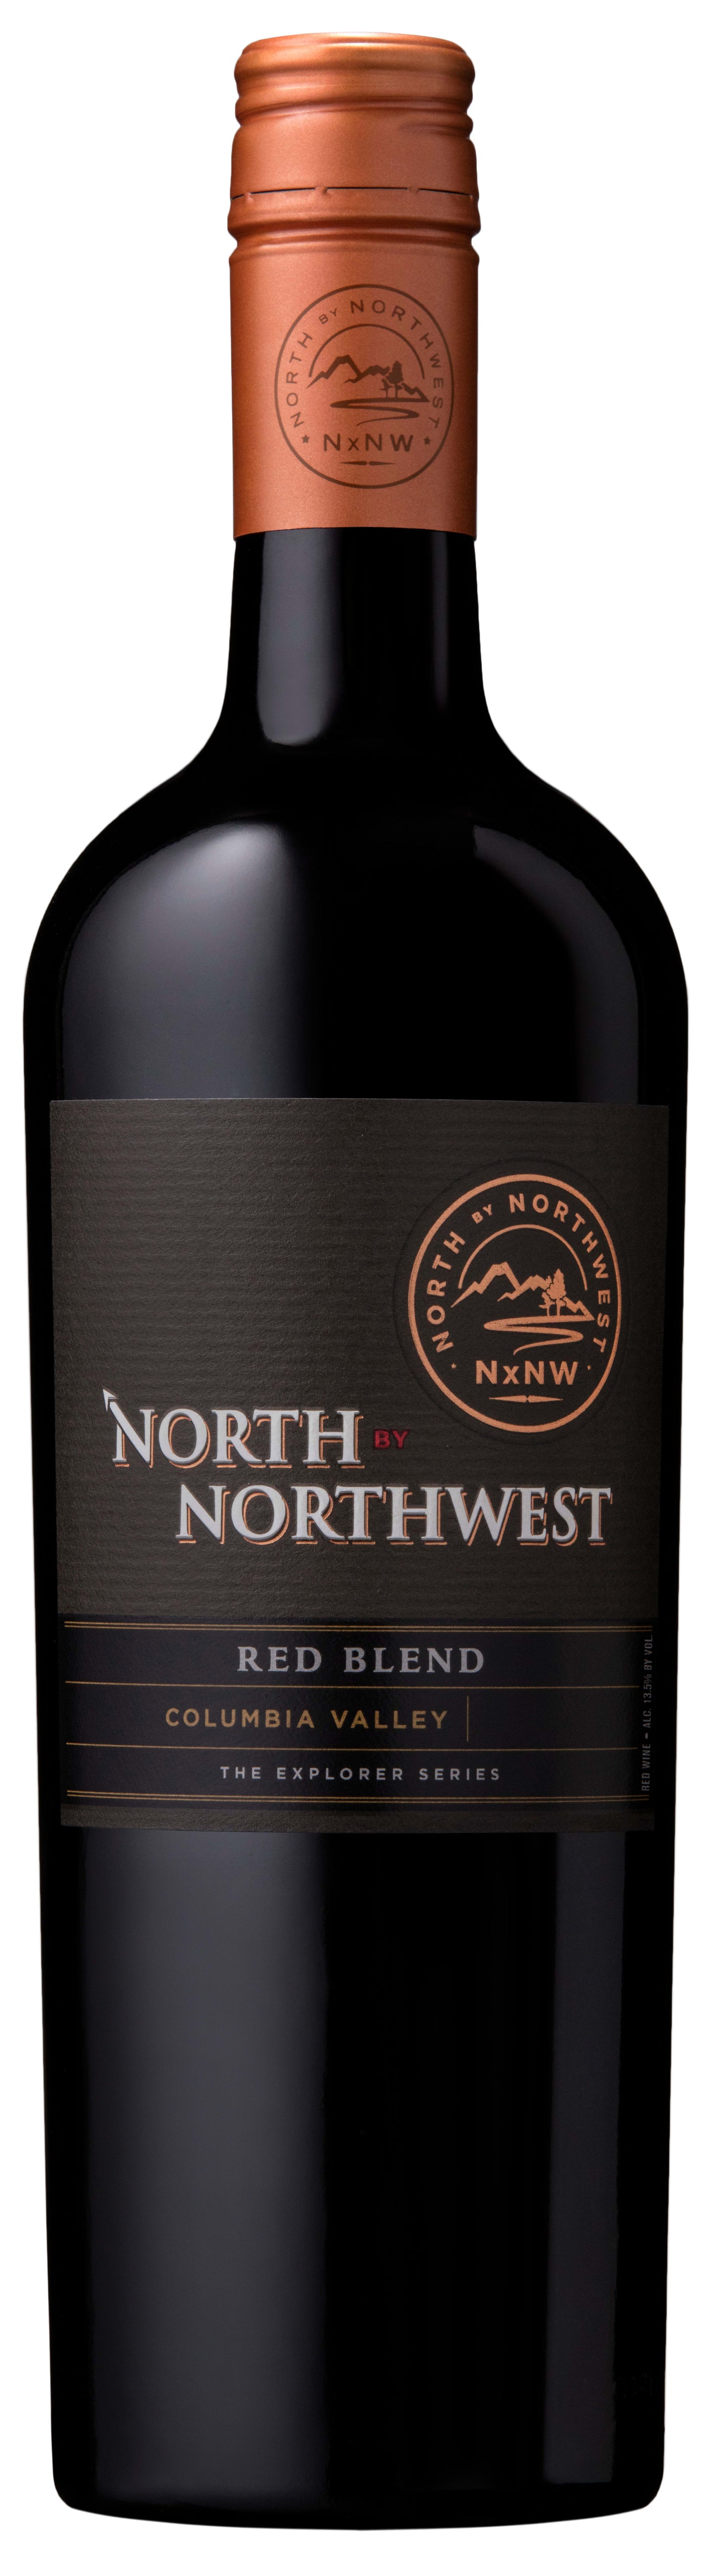 NORTH BY NORTHWEST RED BLEND COLUMBIA VALLEY